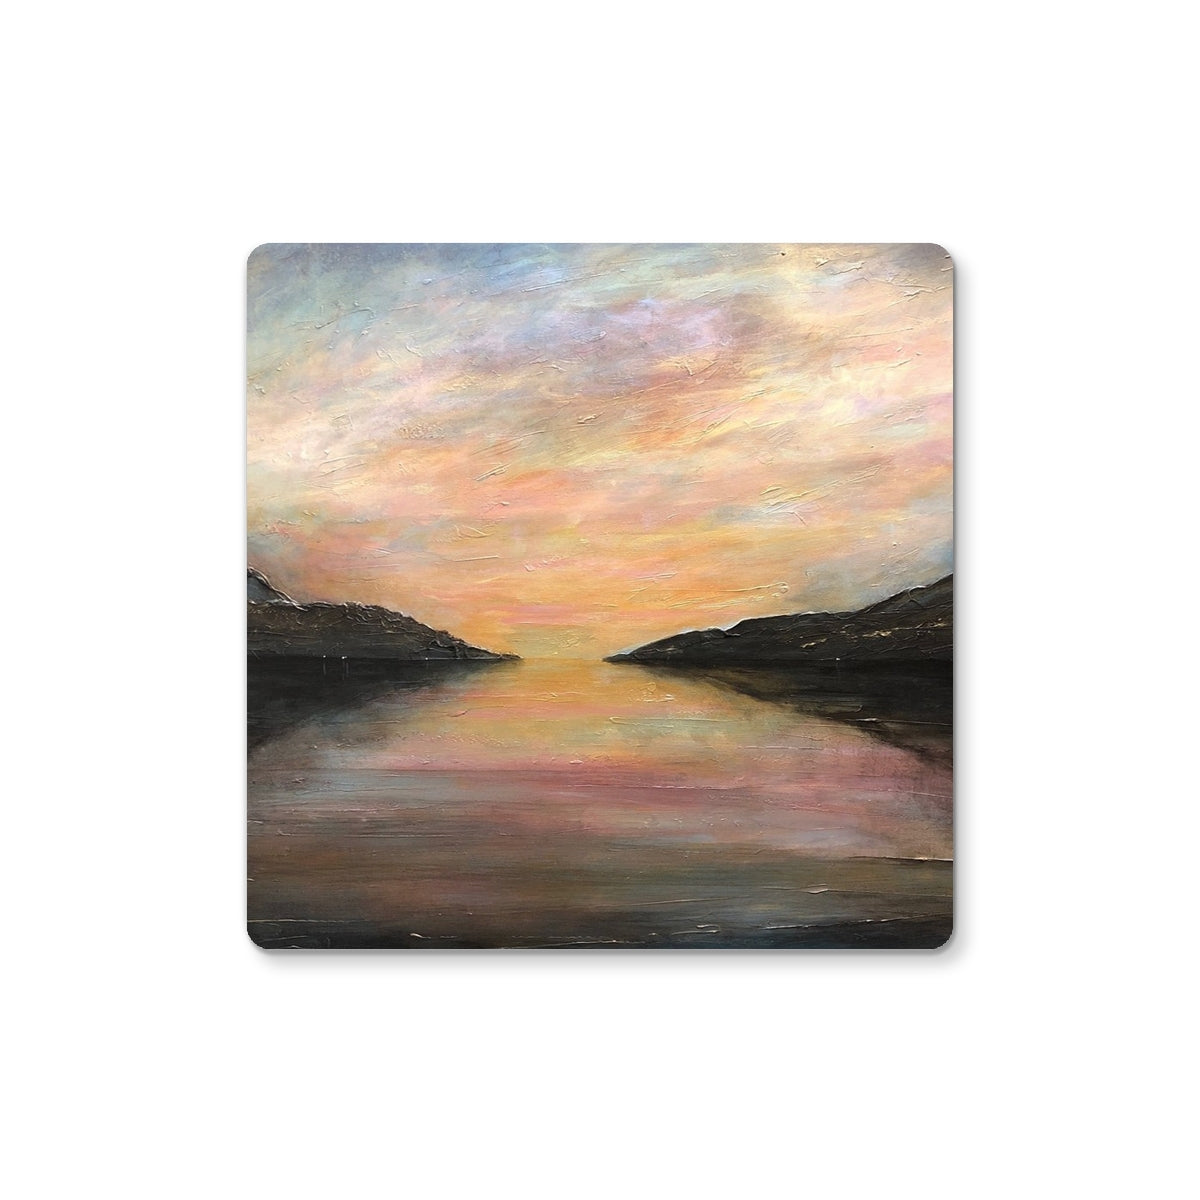 Loch Ness Glow Art Gifts Coaster-Coasters-Scottish Lochs & Mountains Art Gallery-Single Coaster-Paintings, Prints, Homeware, Art Gifts From Scotland By Scottish Artist Kevin Hunter